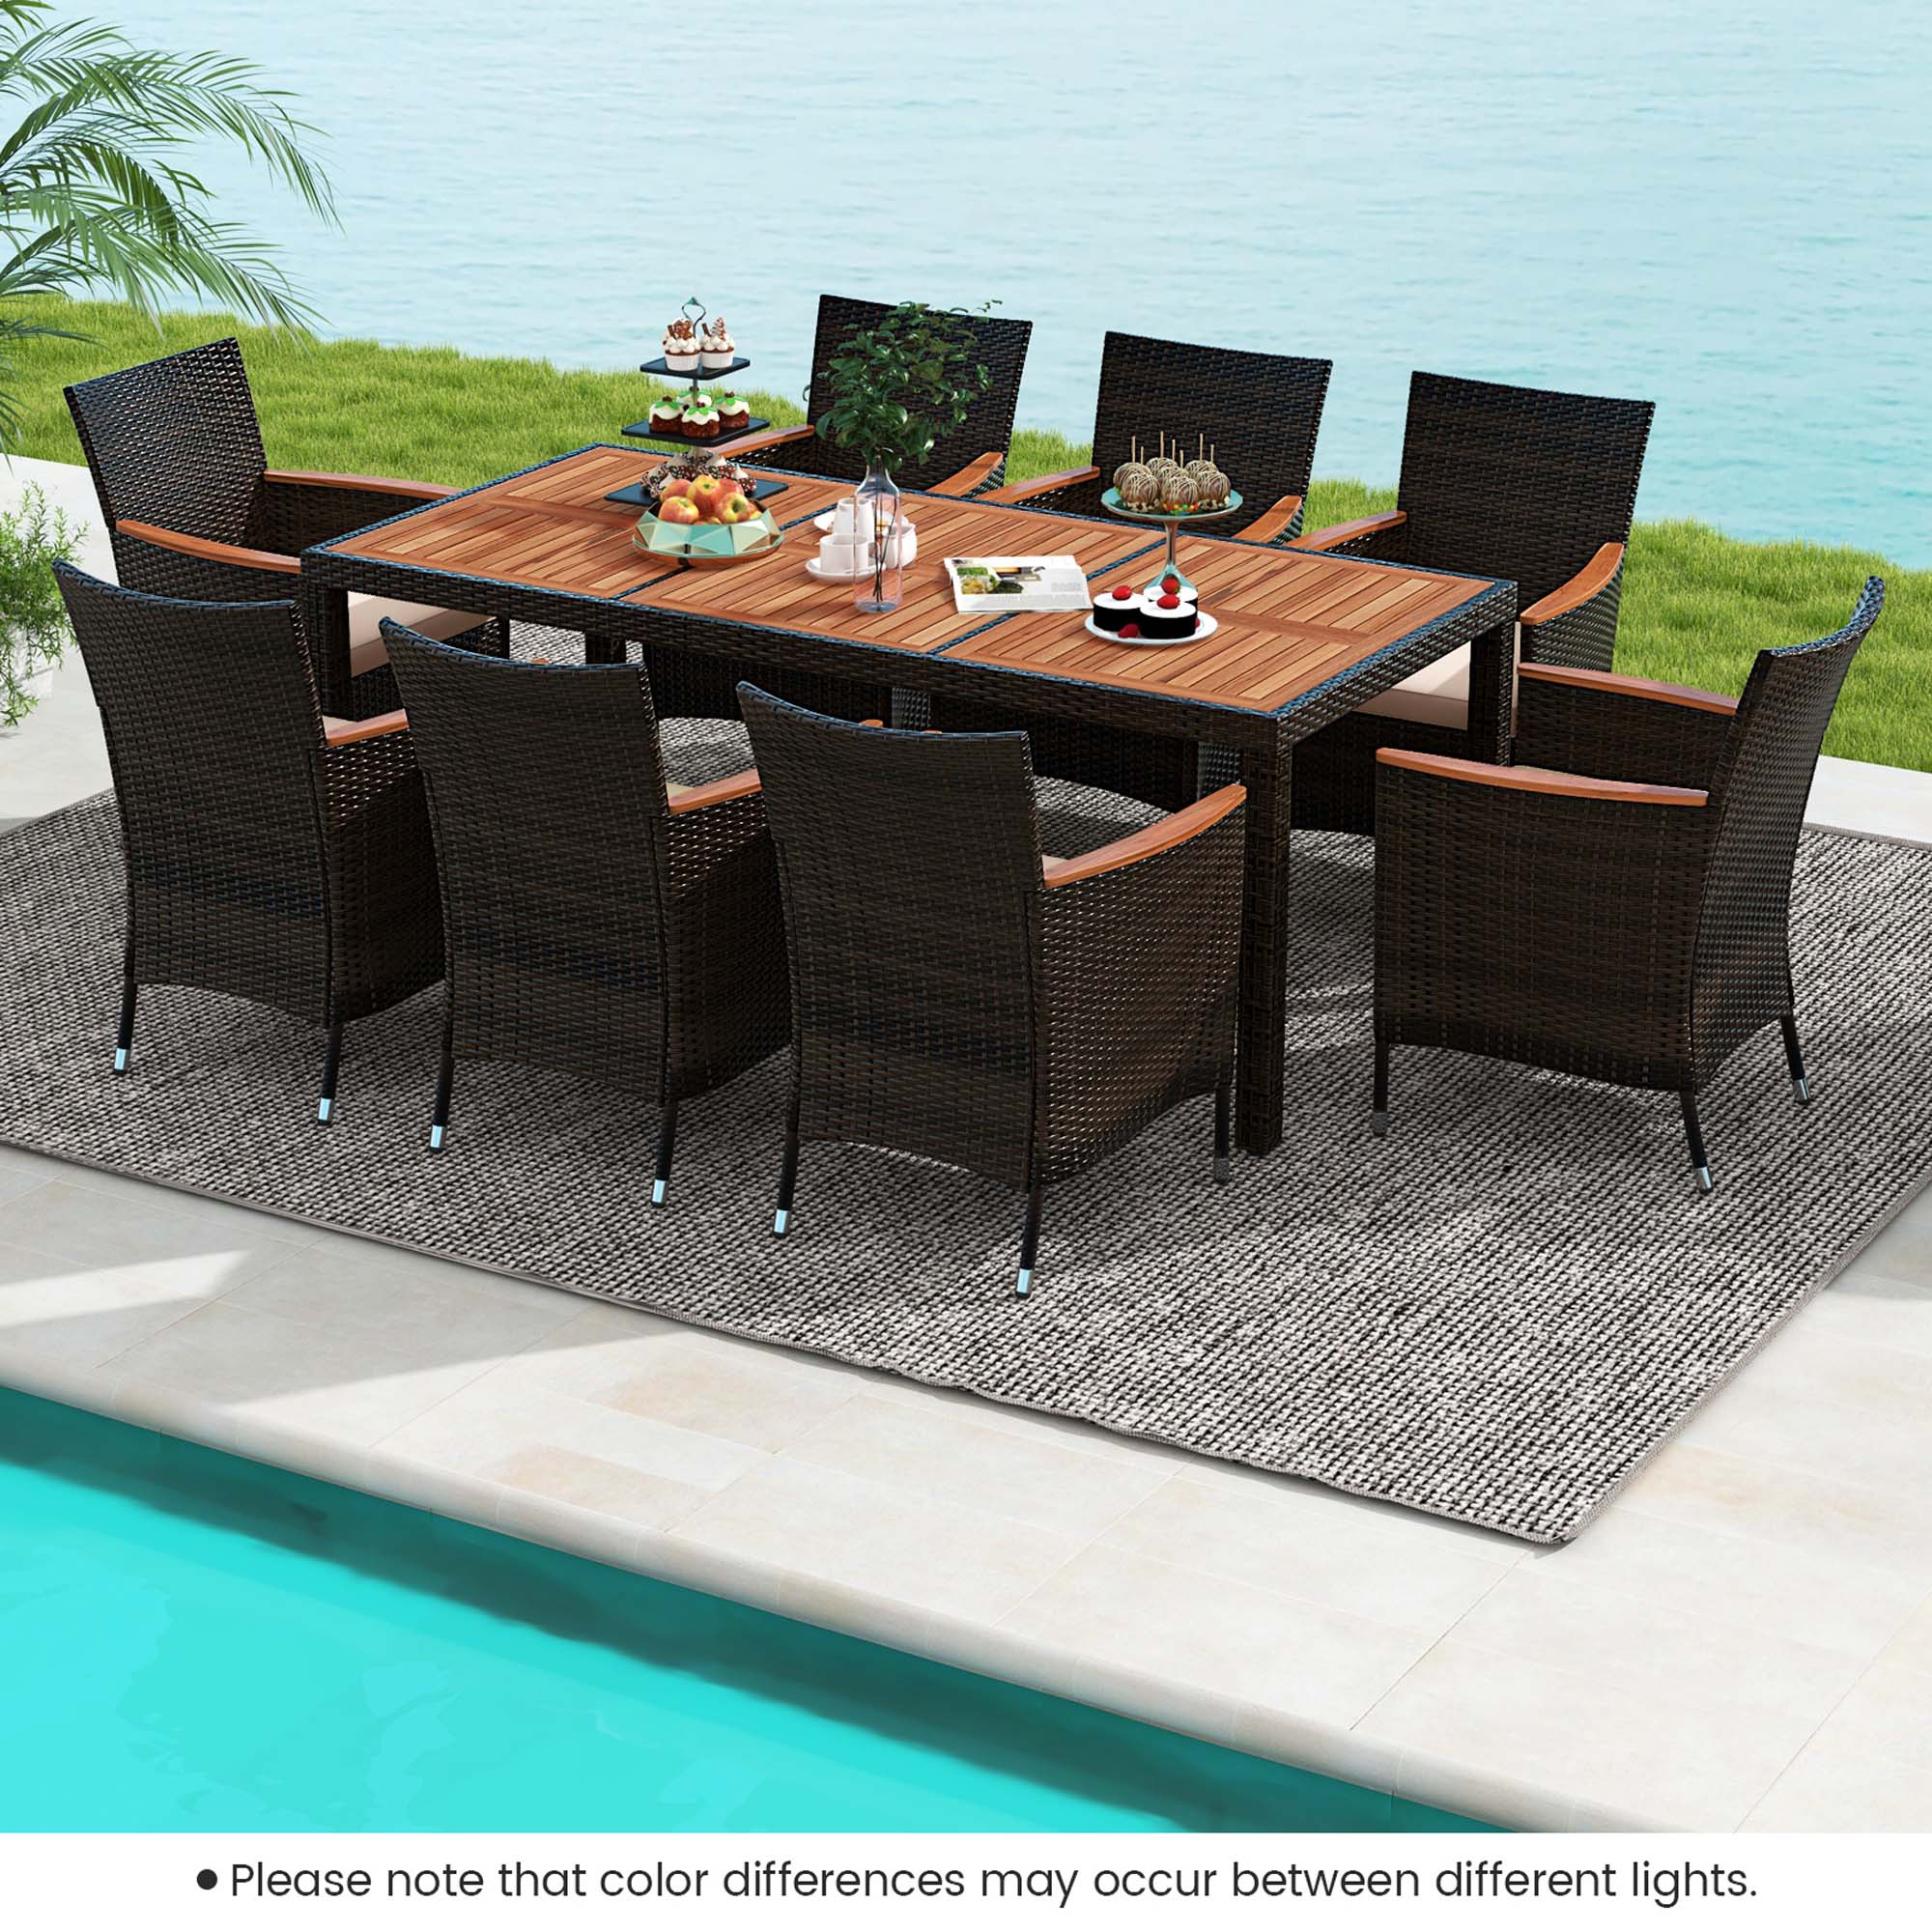 Costway 9PCS Patio Wicker Dining Set Acacia Wood Table Top Umbrella Hole Cushions Chairs - image 4 of 10